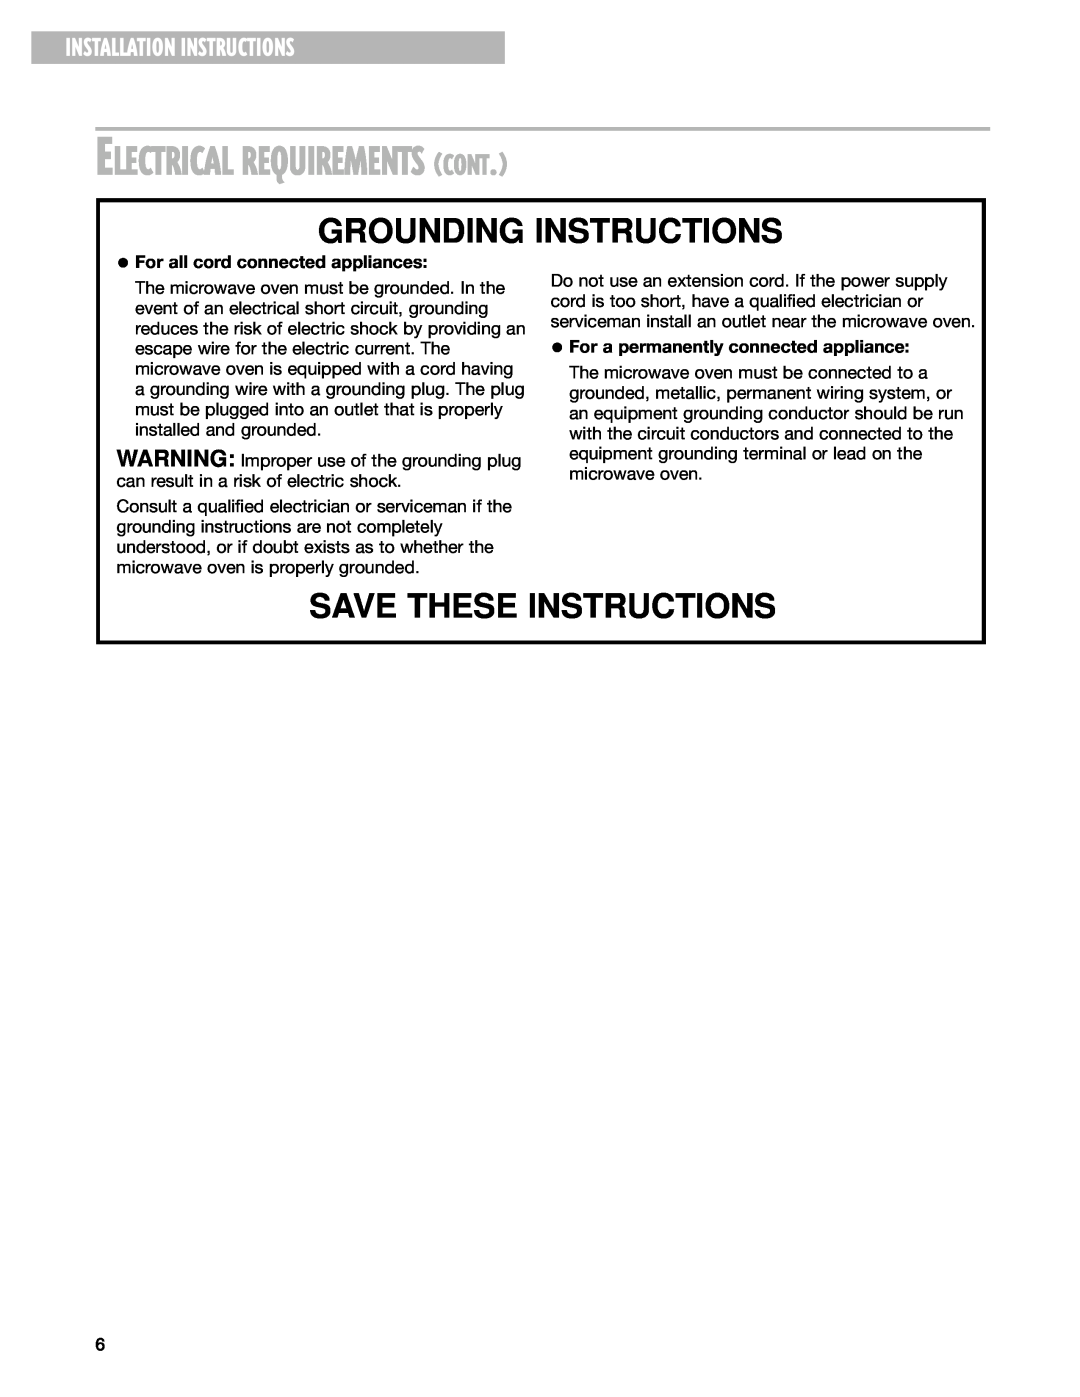 Whirlpool MT4145SK Electrical Requirements Cont, Grounding Instructions, Installation Instructions 